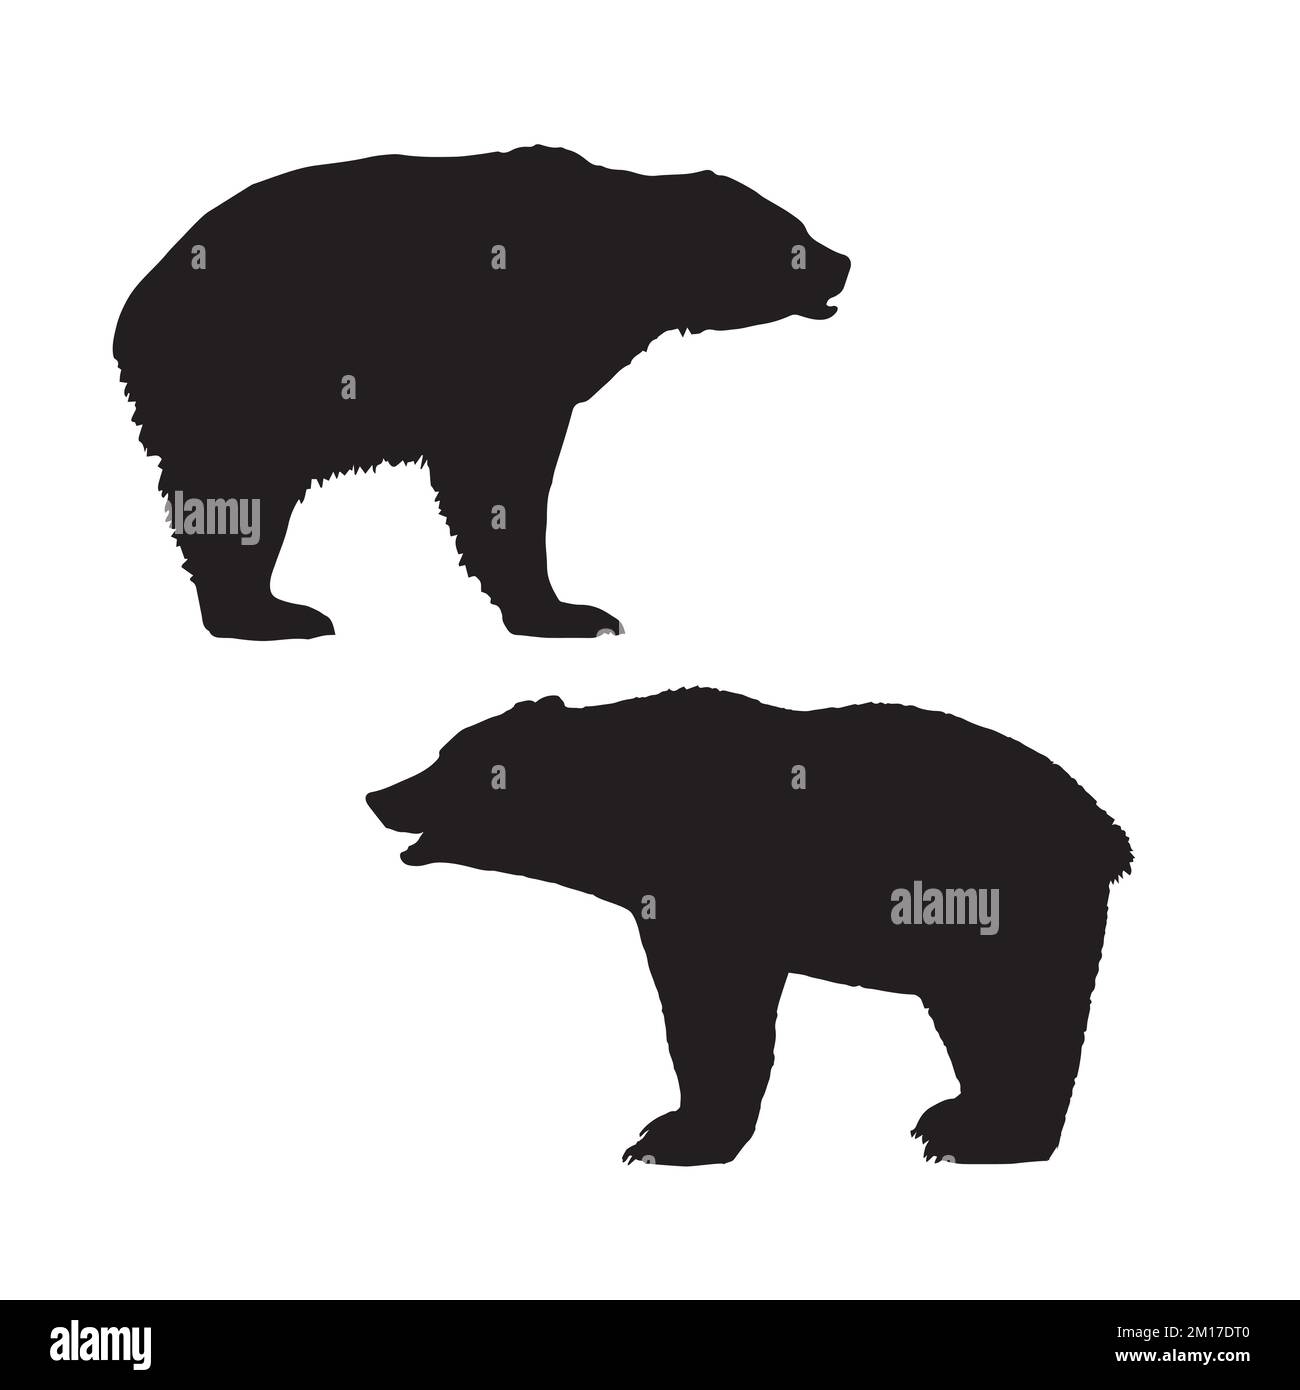 Vector Illustration of Grizzly Bear Silhouette Stock Vector